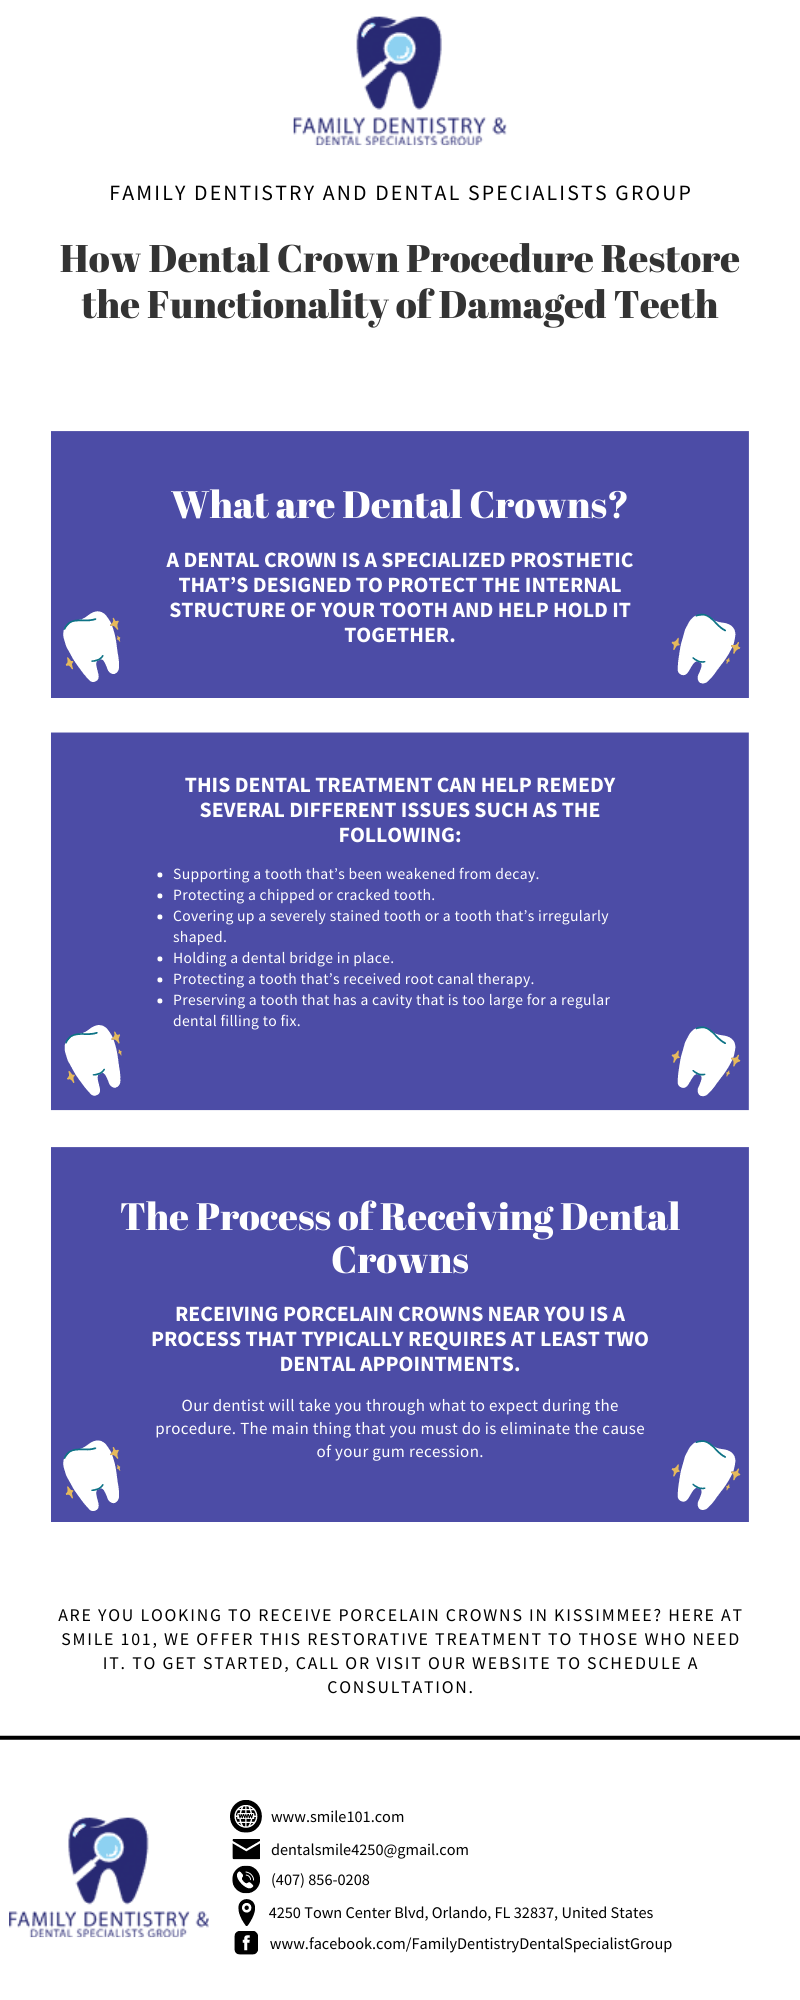 FAMILY DENTISTRY &amp;
FAMILY DENTISTRY AND DENTAL SPECIALISTS GROUP

How Dental Crown Procedure Restore
the Functionality of Damaged Teeth

What are Dental Crowns?

A DENTAL CROWN IS A SPECIALIZED PROSTHETIC
THAT’S DESIGNED TO PROTECT THE INTERNAL

STRUCTURE OF YOUR TOOTH AND HELP HOLD IT
a Uda E

THIS DENTAL TREATMENT CAN HELP REMEDY
SEVERAL DIFFERENT ISSUES SUCH AS THE
FOLLOWING:

RCN TI

h that

oth that has

he Process of Receiving Dental
(OXY IT
RECEIVING PORCELAIN CROWNS NEARYOU ISA

PROCESS THAT TYPICALLY REQUIRES AT LEAST TWO
DENTAL APPOINTMENTS.

 

ARE YOU LOOKING TO RECEIVE PORCELAIN CROWNS IN KISSIMMEE? HERE AT
SMILE 101, WE OFFER THIS RESTORATIVE TREATMENT TO THOSE WHO NEED
IT. 10 STARTED, CALL OR VISIT QUR WEBSITE TO SCHEDULE A
CONSULTATION

 

 
  

® www smilel01 com

BE dentalsmiled250@gmal com

 

  

  

[&lt;] 856.0208
FAMILY DENTISTRY &amp; @ 4250 Town Center Bive, Orlanco, FL 12637, United States
Temas B ow tacevookc yDentistryDentalSpeciabstGroup